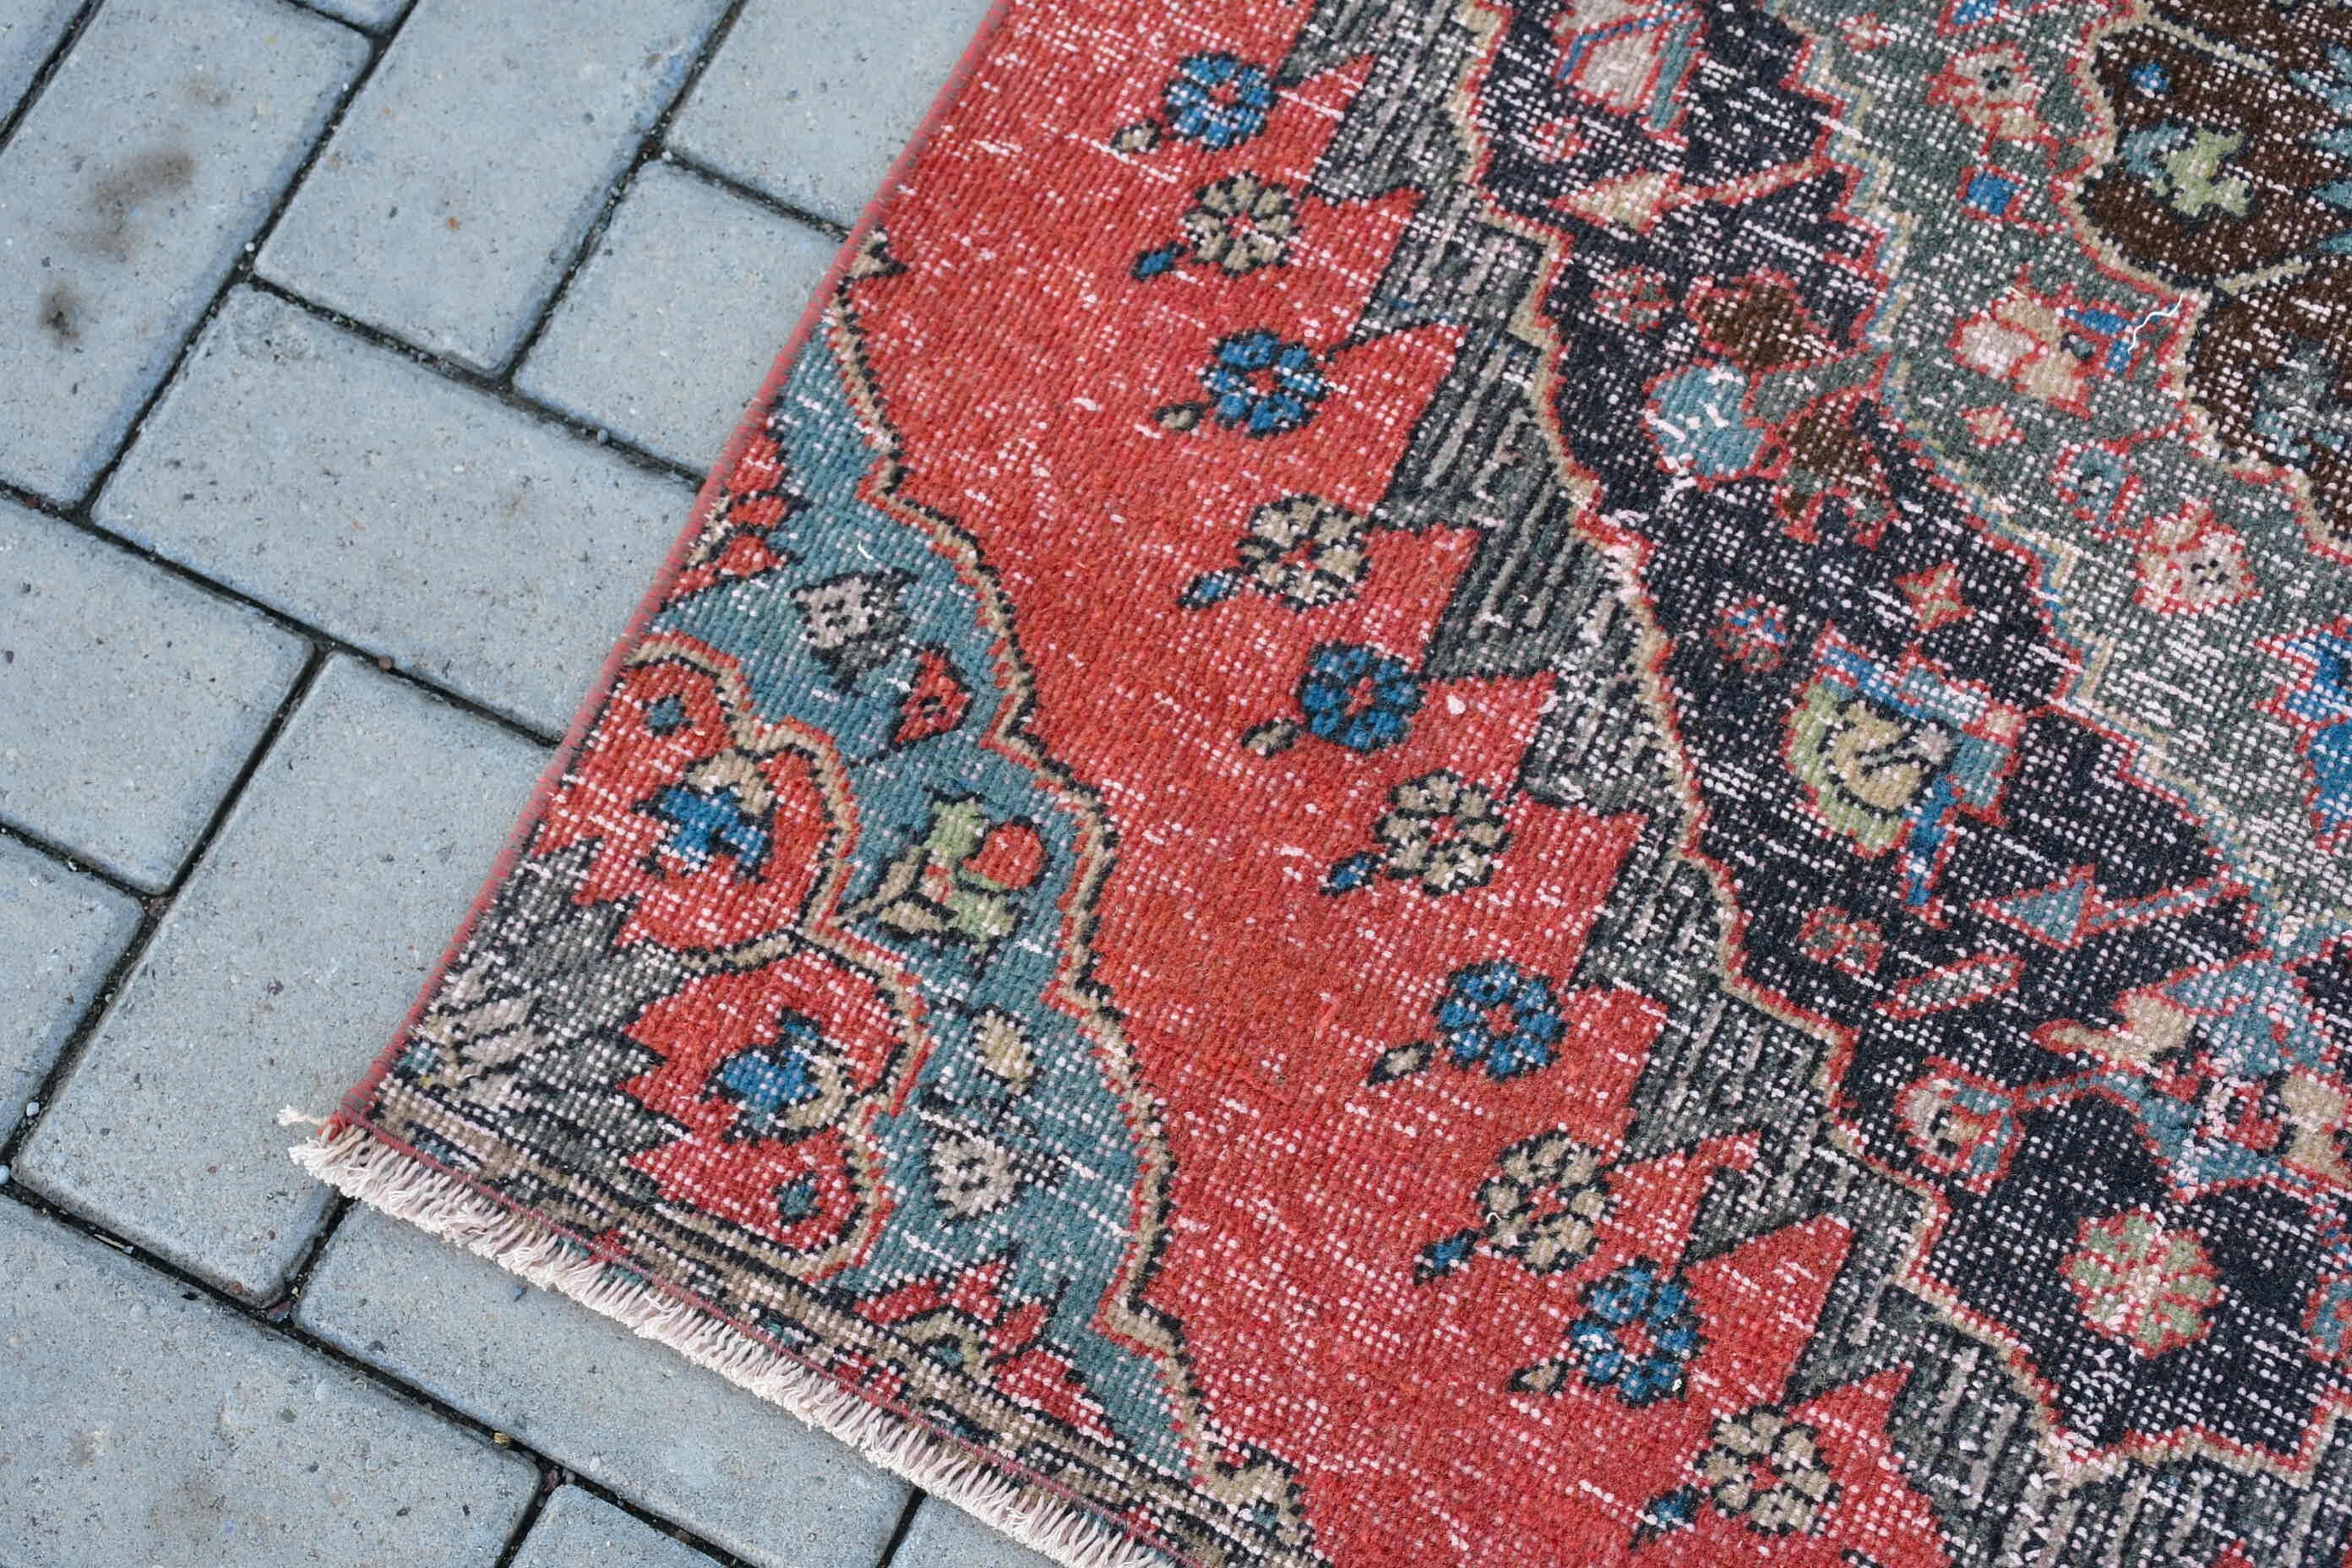 Kitchen Rugs, Rugs for Wall Hanging, Red Cool Rug, Eclectic Rug, Vintage Rugs, 3.3x4.1 ft Small Rug, Turkish Rug, Car Mat Rug